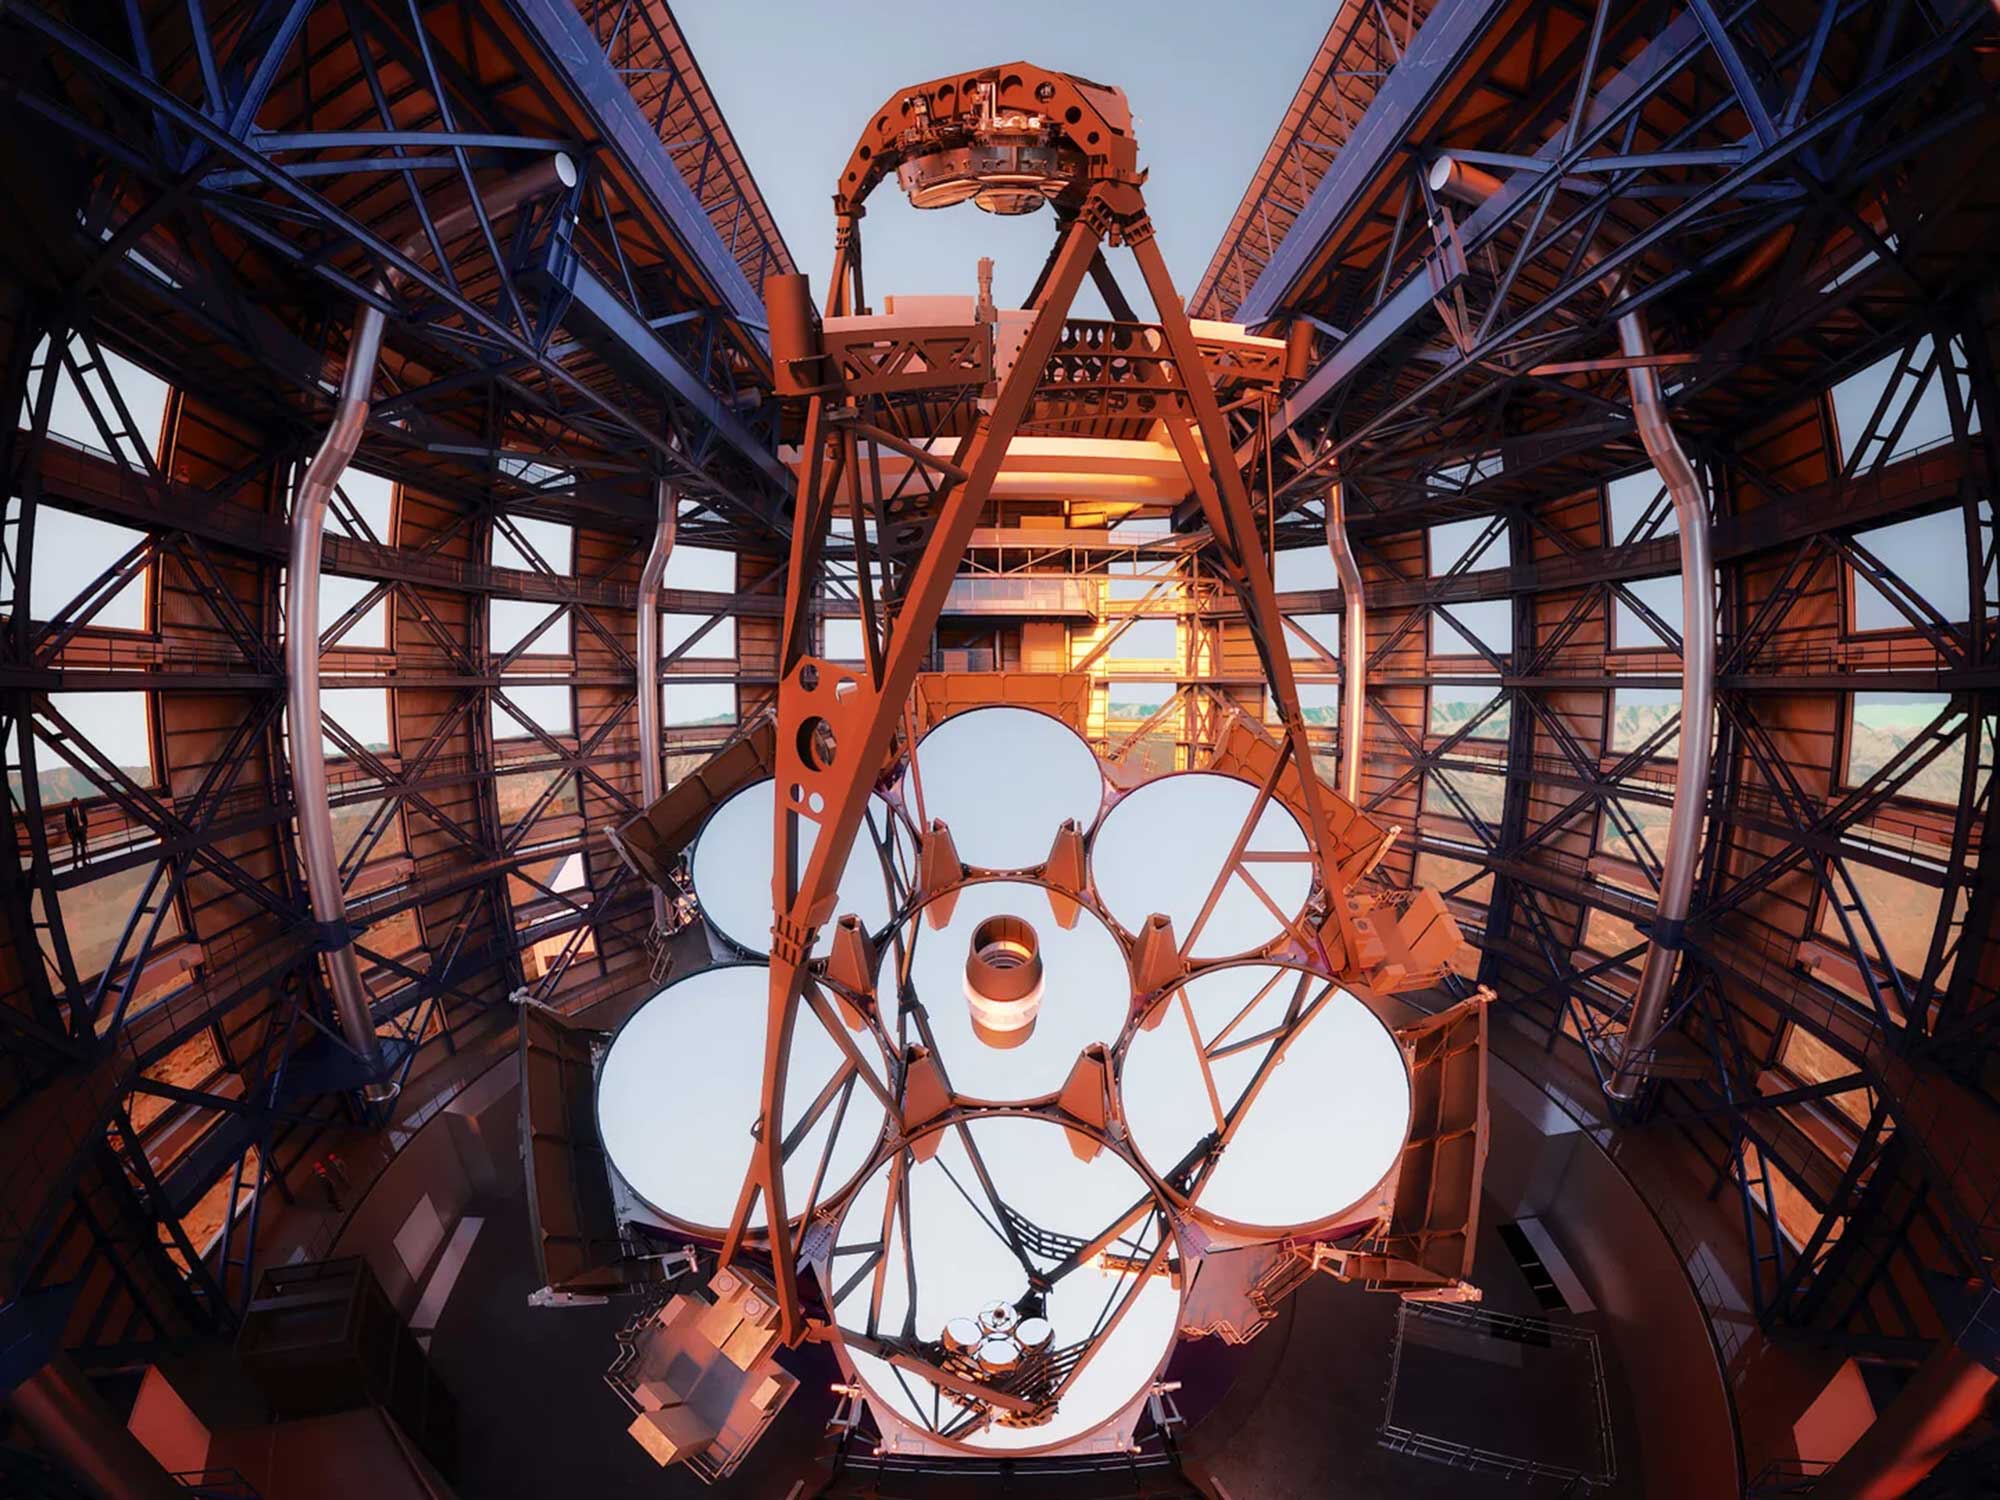 The most powerful telescope of all time is coming to Chile